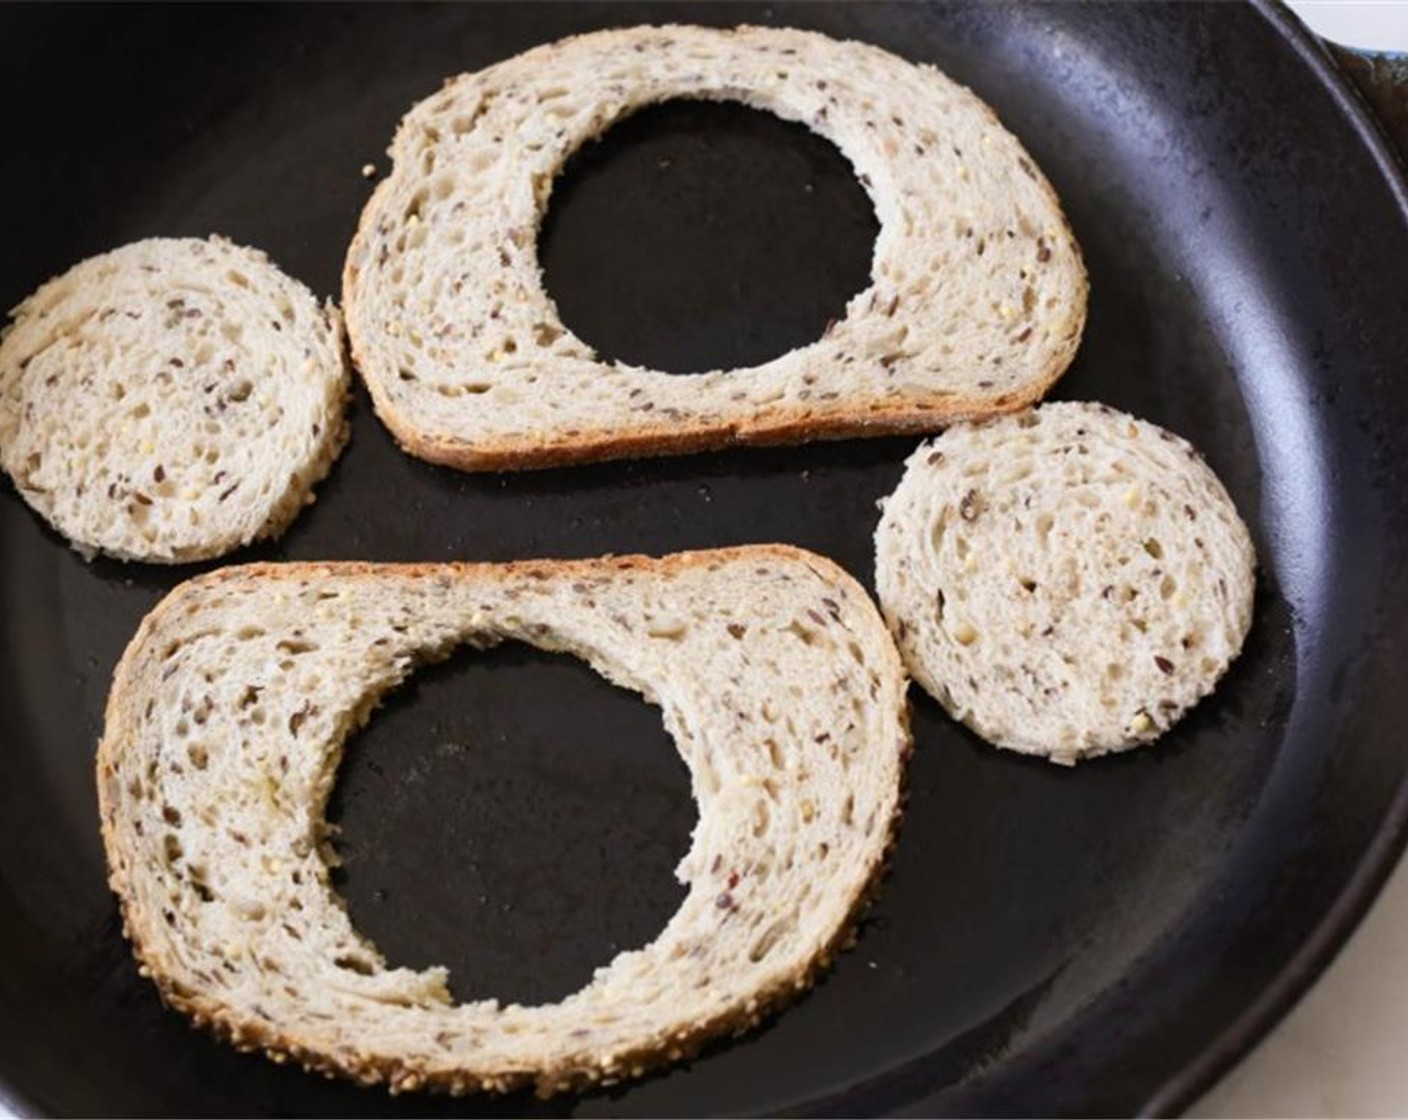 step 3 Heat a large skillet (preferably cast iron) over medium-high heat. When hot, add the Olive Oil (1 tsp) and swirl to coat the bottom of the pan. Add the bread slices and rounds to the pan and cook for about 3 minutes until the undersides are golden brown.